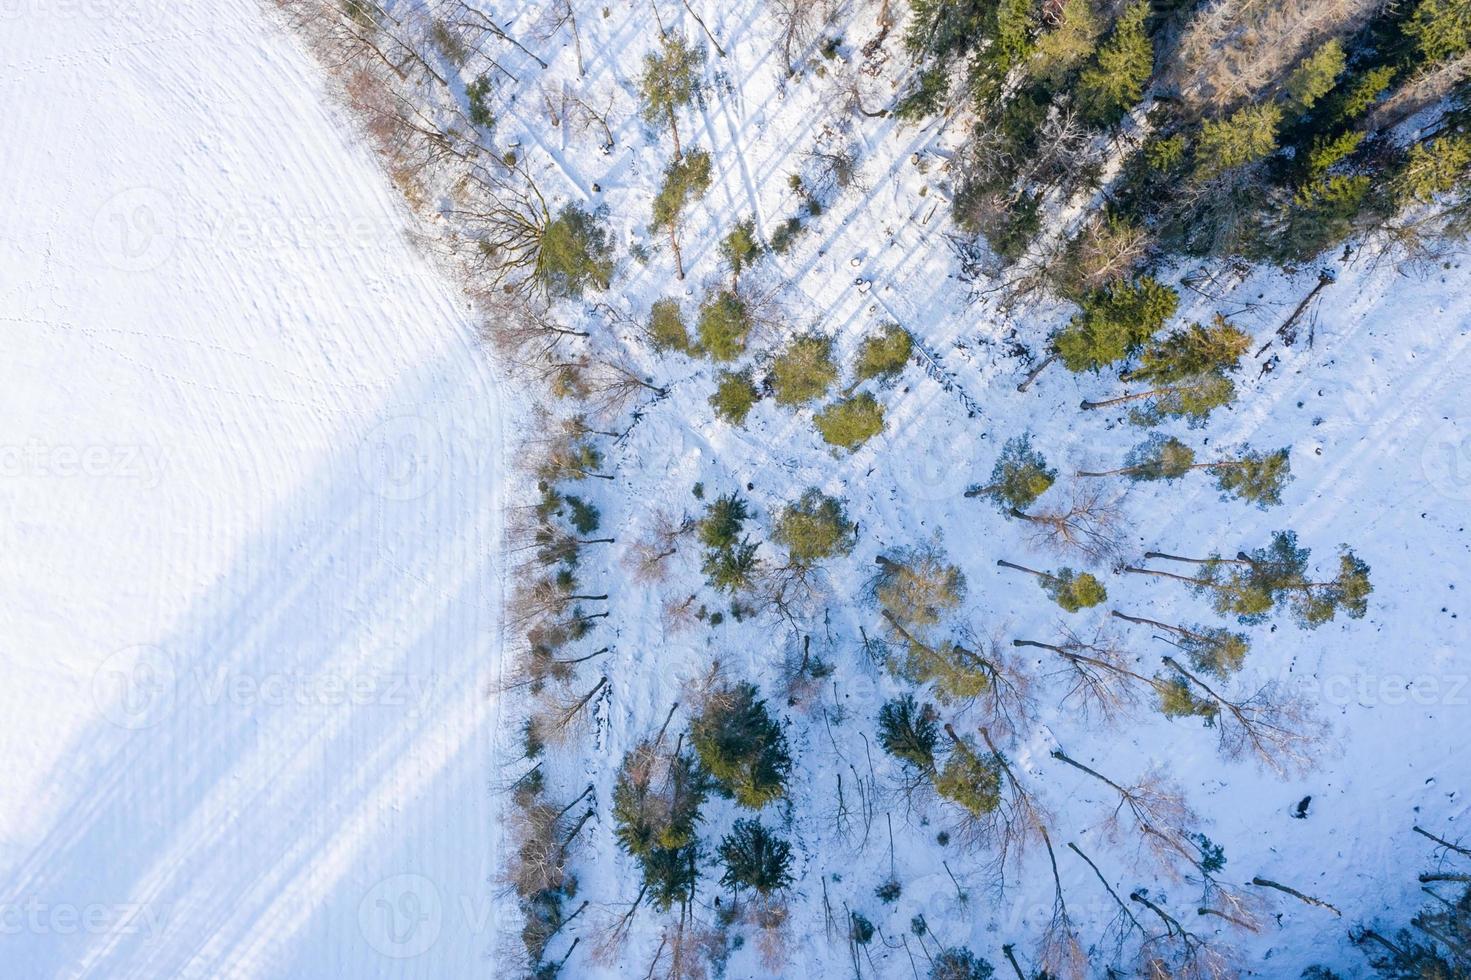 Fabulous aerial winter panorama of mountain forest with snow covered fir trees. Colorful outdoor scene, Happy New Year celebration concept. Beauty of nature concept background. photo